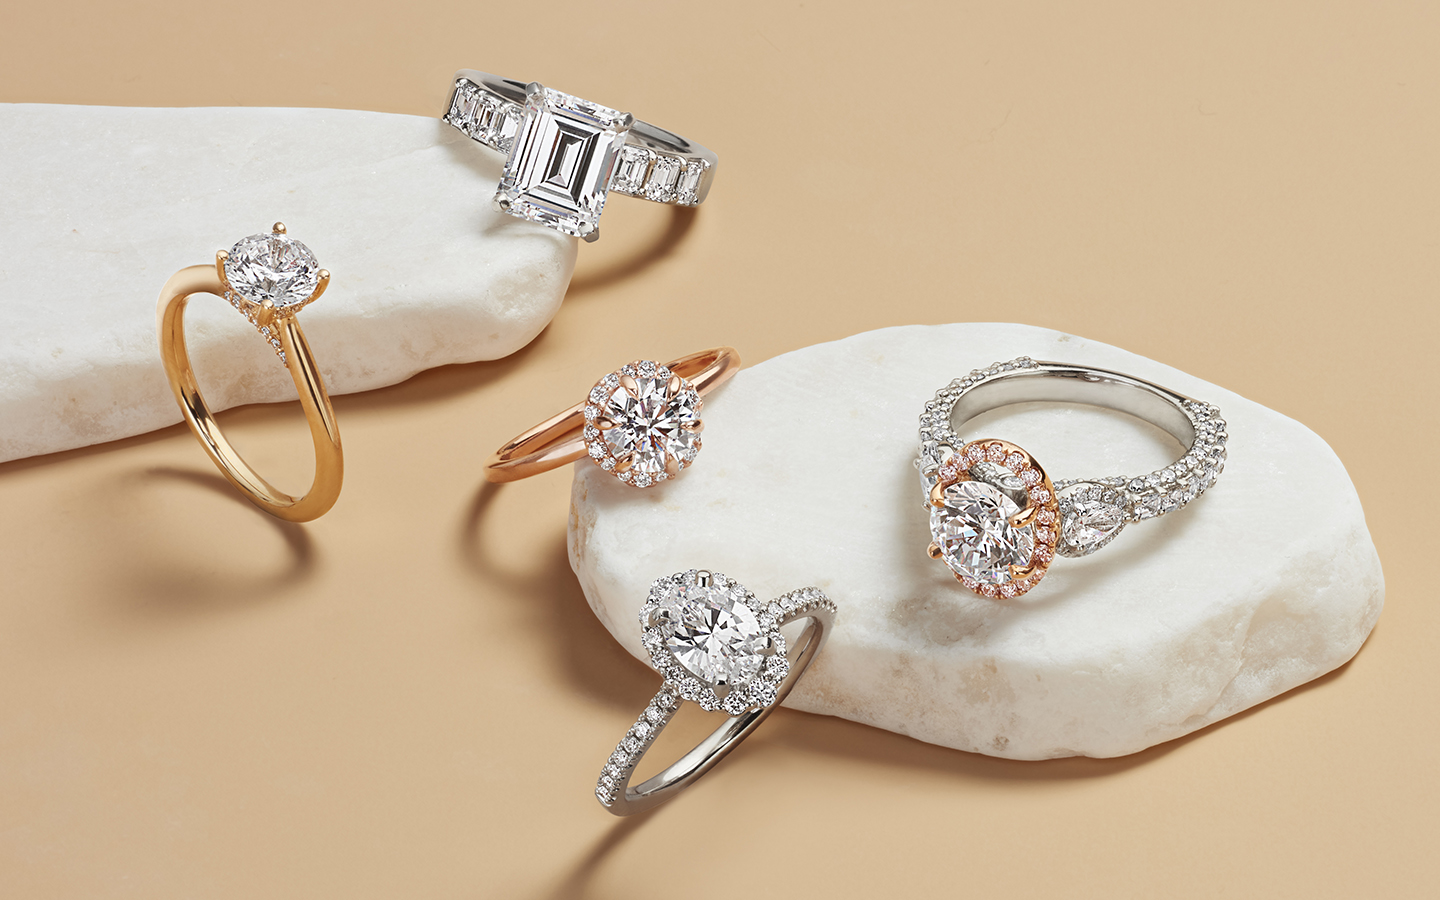 Five engagement rings including white gold, rose gold and platinum rings with diamonds.